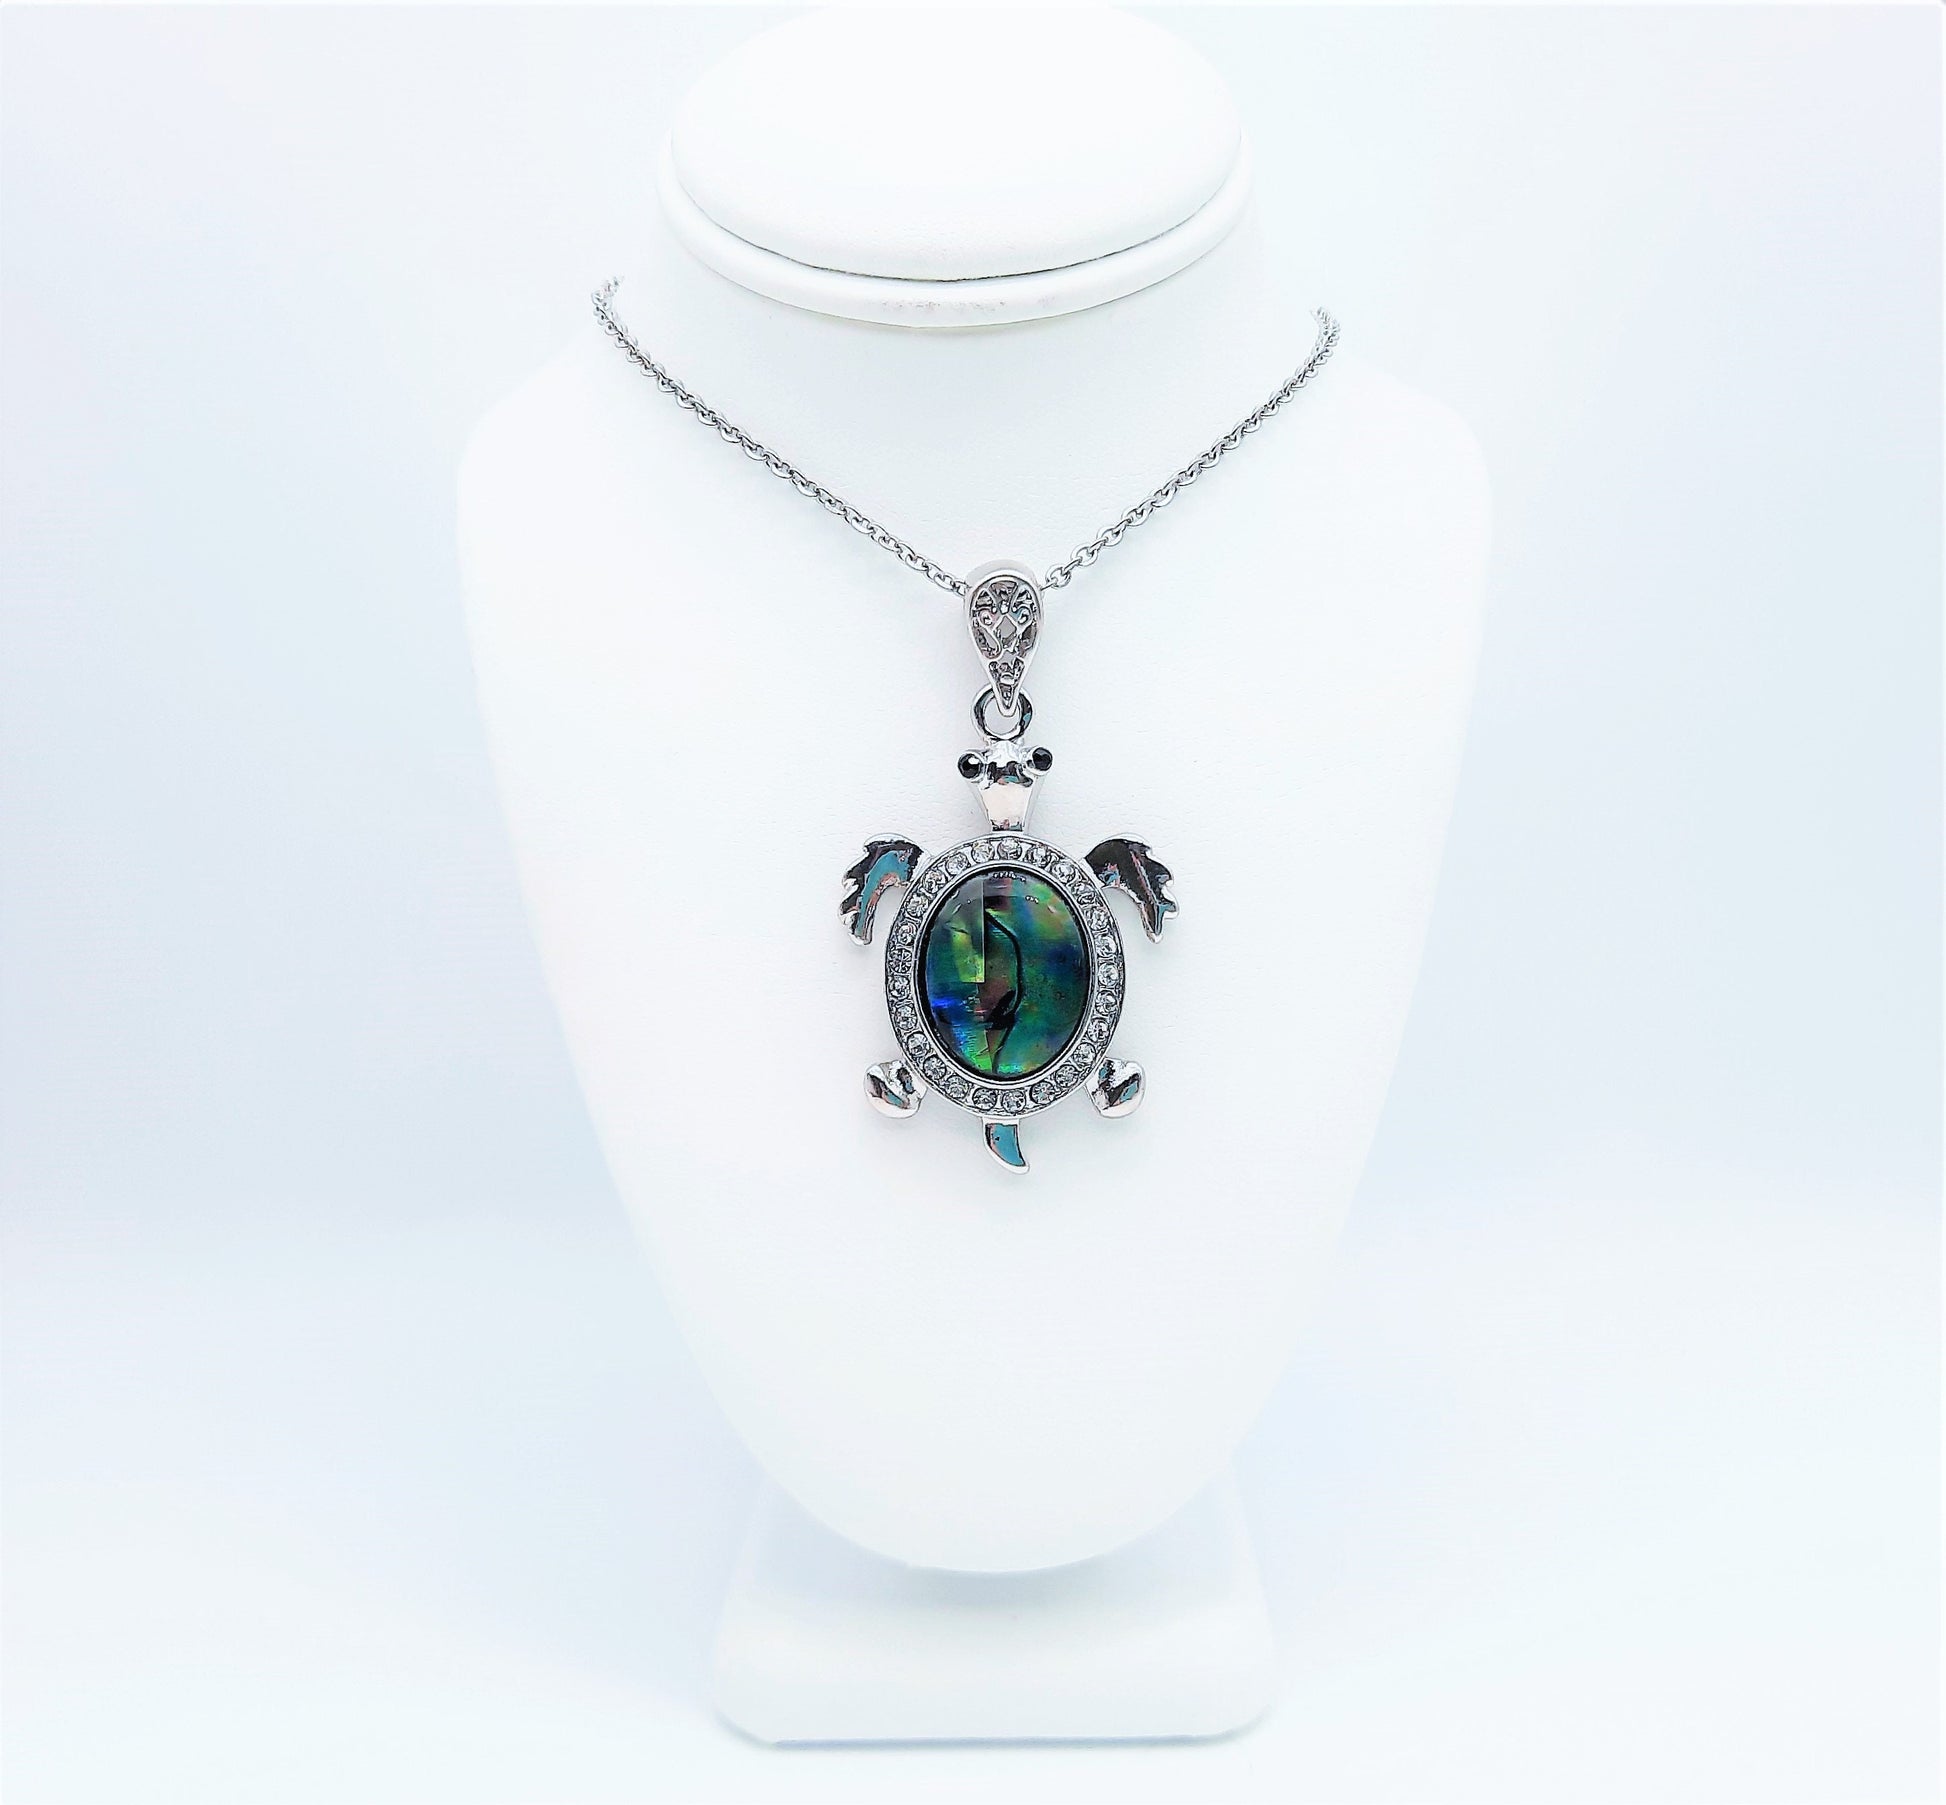 Abalone/Paua Seashell Sea Turtle Pendant Necklace - Stainless Steel Hypoallergenic Chain-Lobster Claw Closure - Silver-Coated Brass Pendant